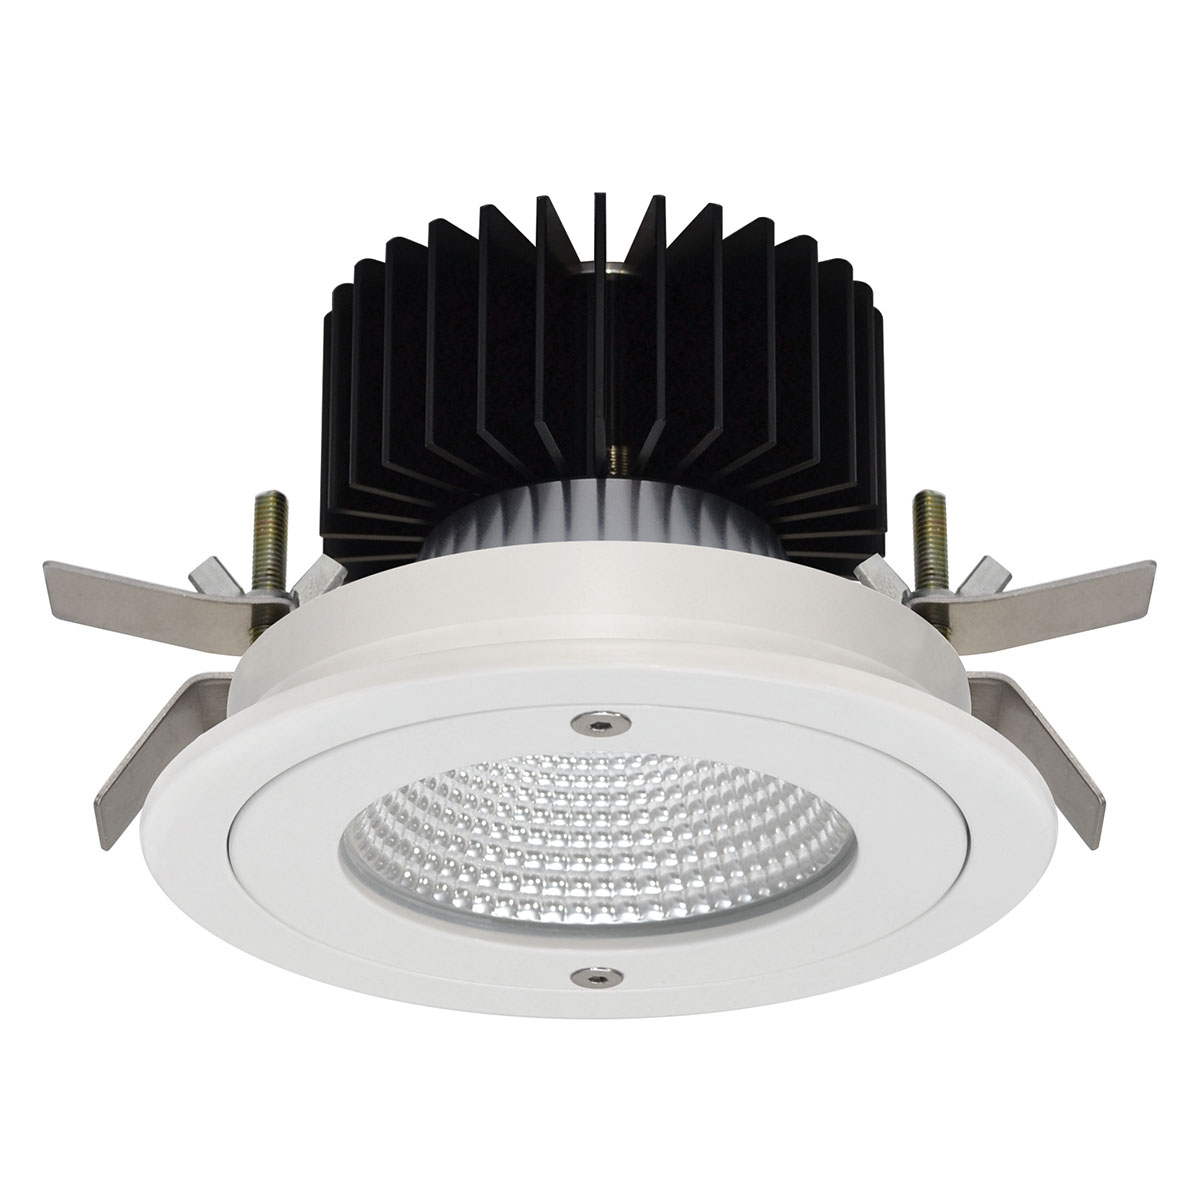 Kopa 13W Anti Tamper Fixed Round Recessed Downlight IP65 Rated 38° Degree Reflector Black